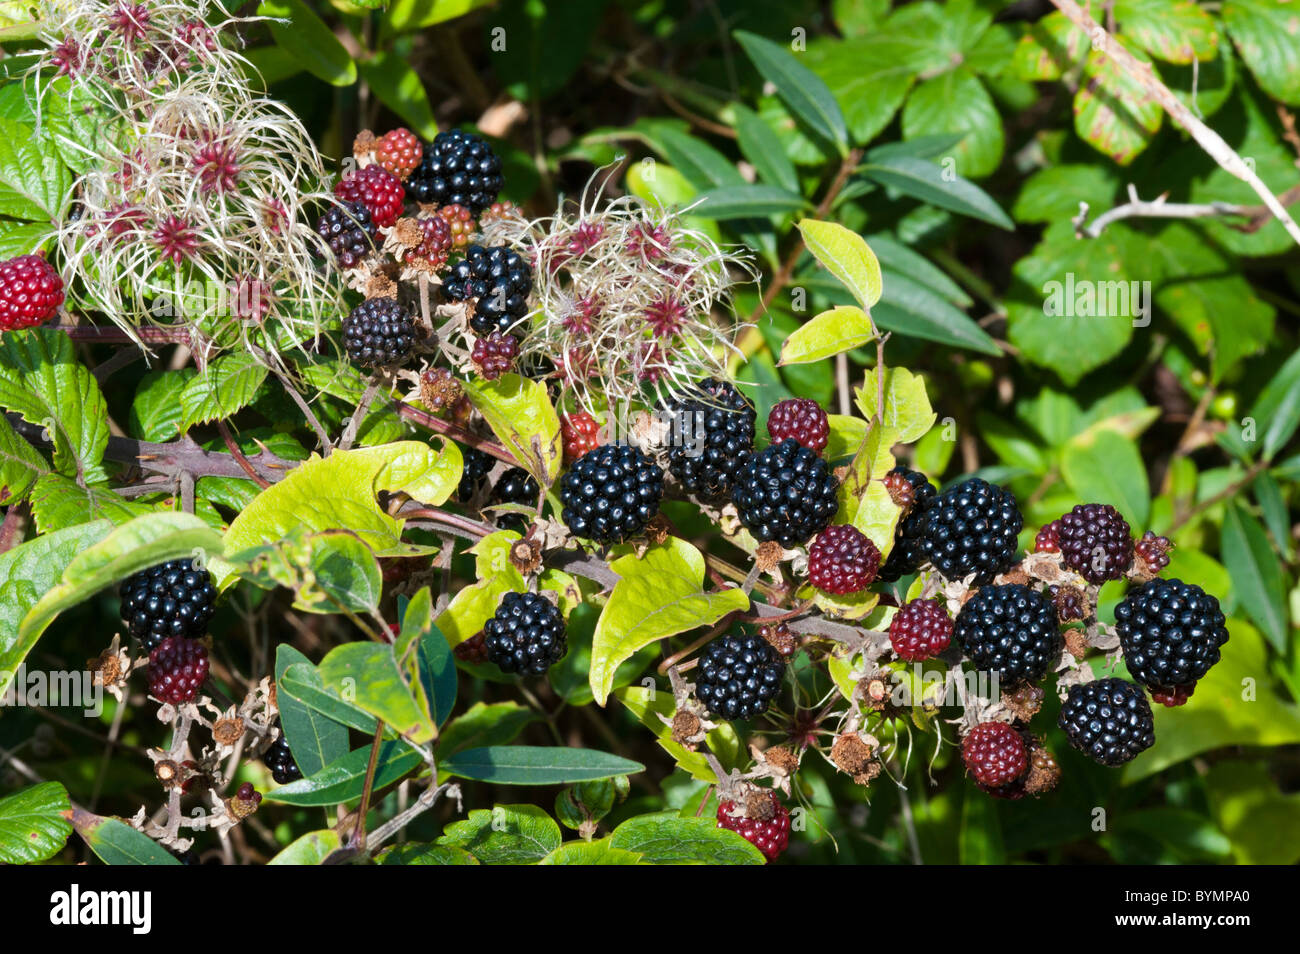 Blackberries with Old Man's Beard seed heads Stock Photo